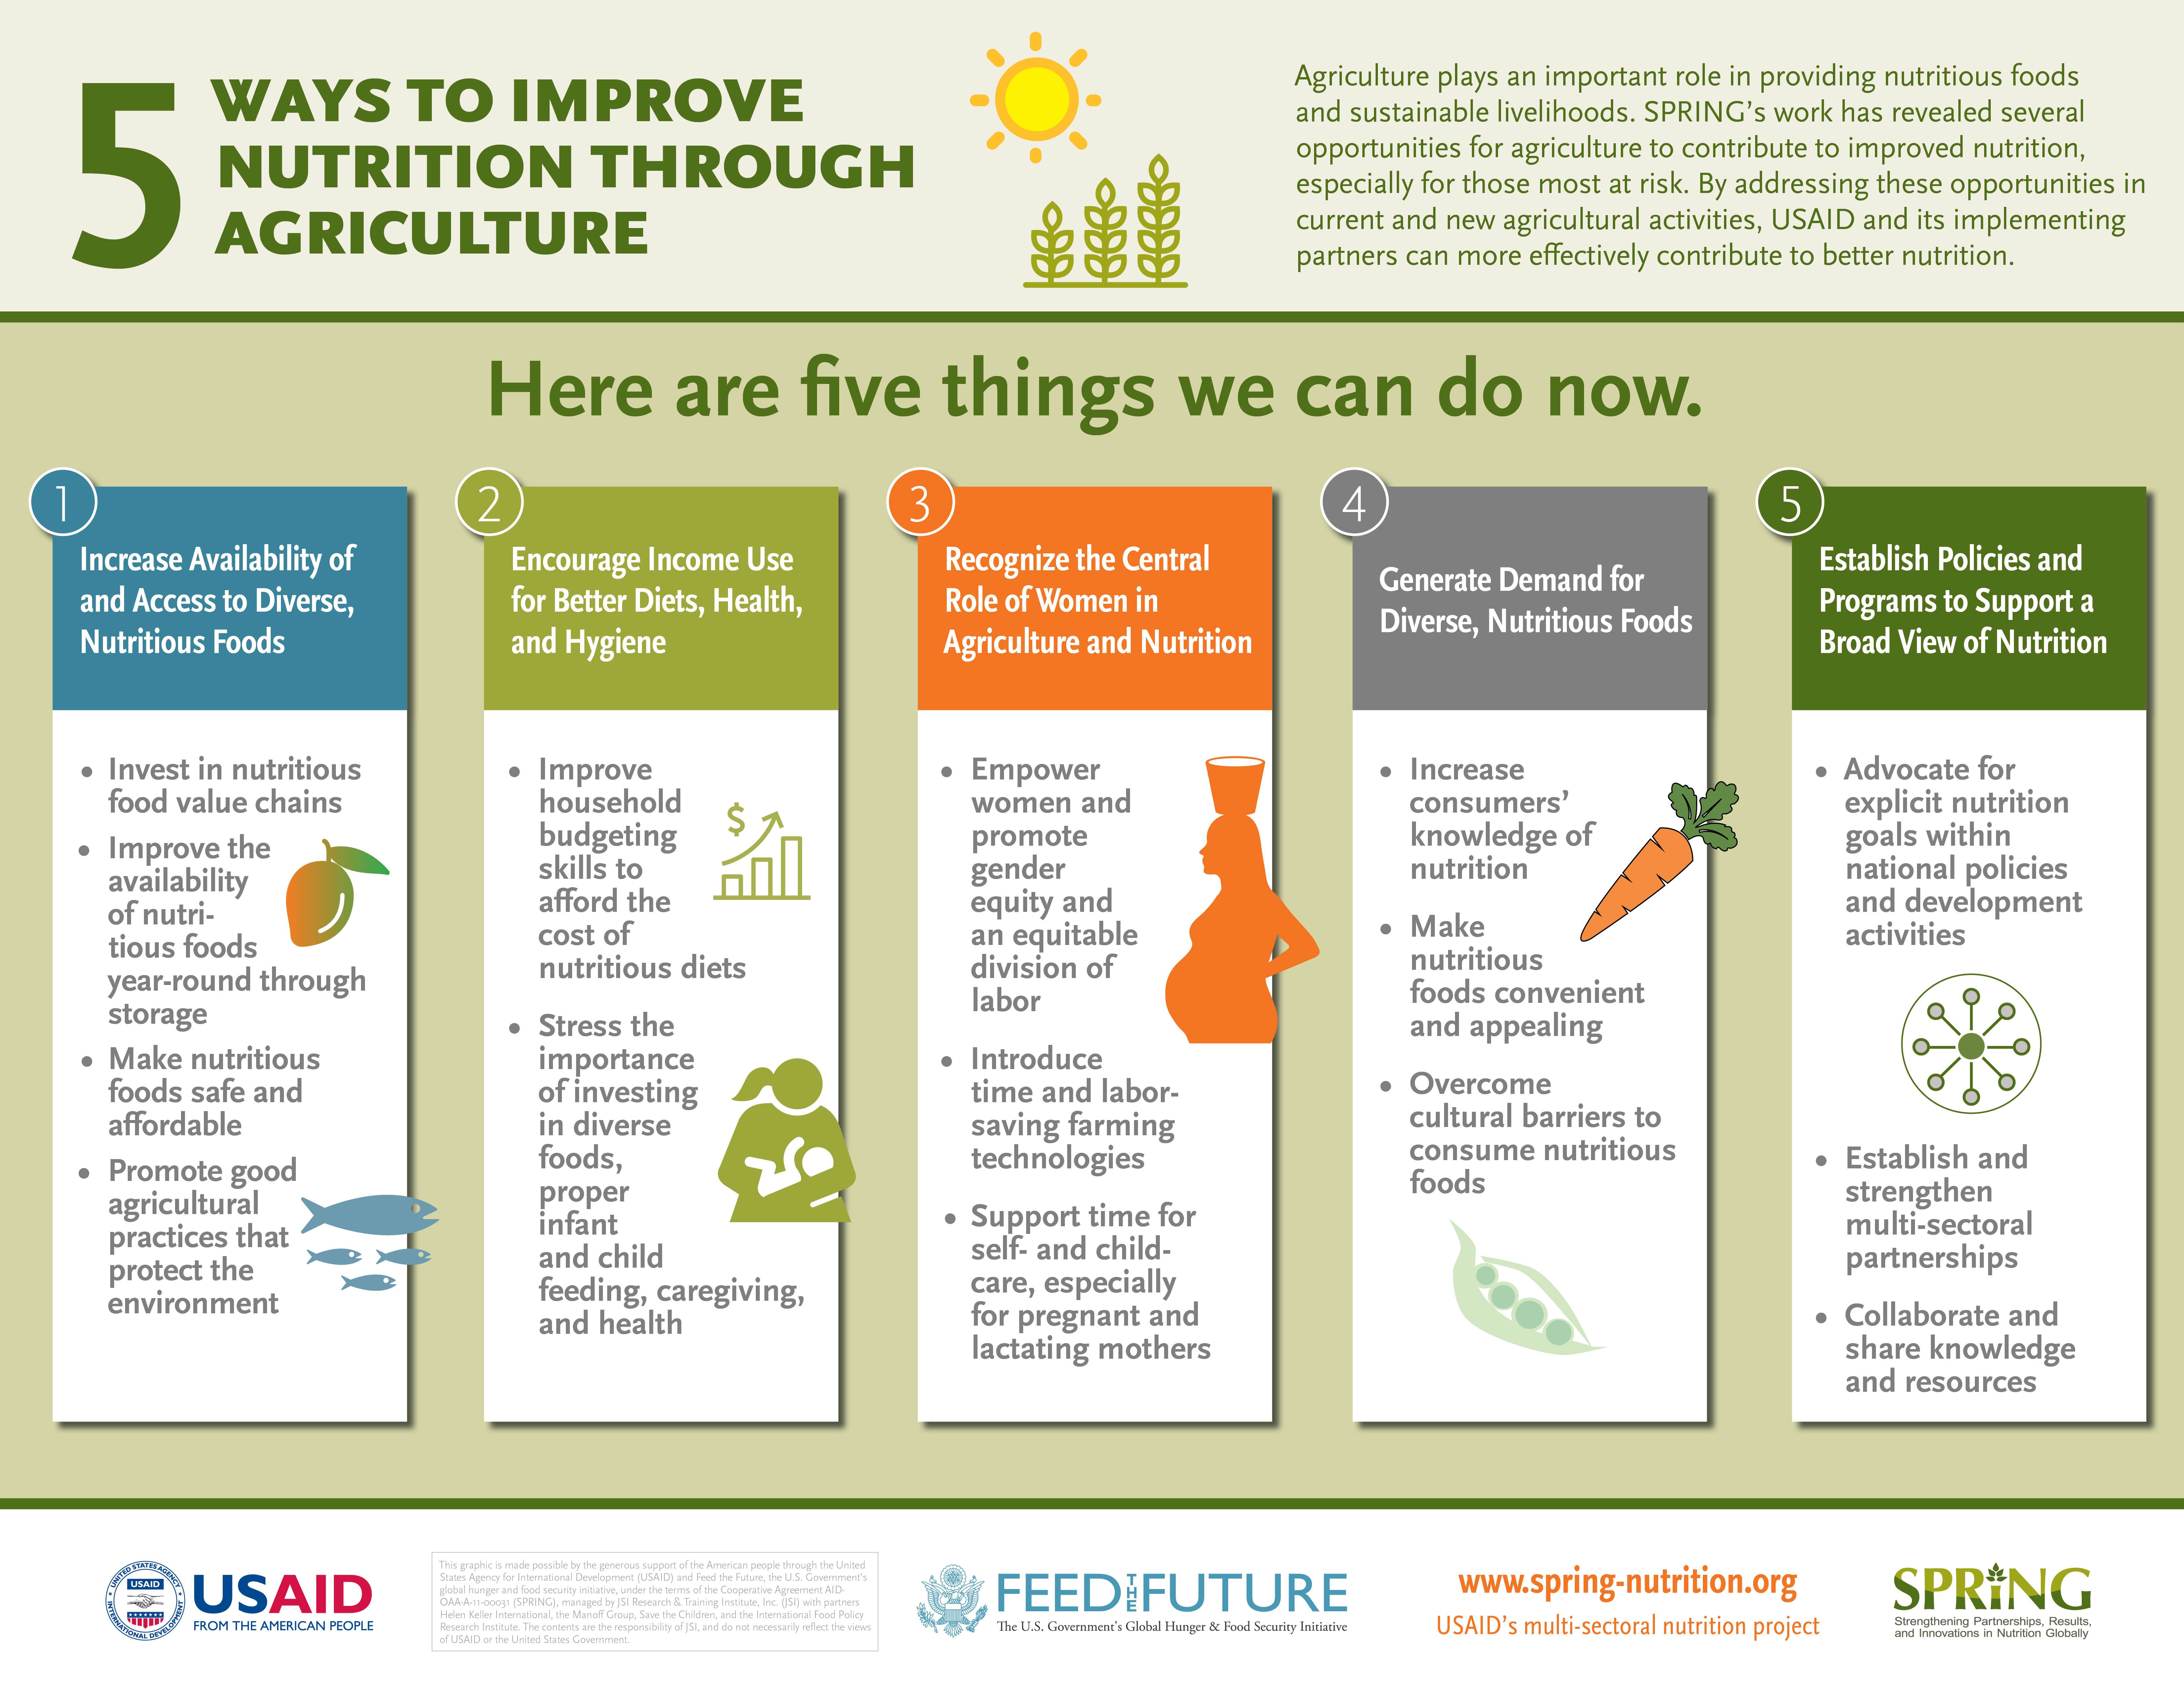 Five Ways to Improve Nutrition Through Agriculture